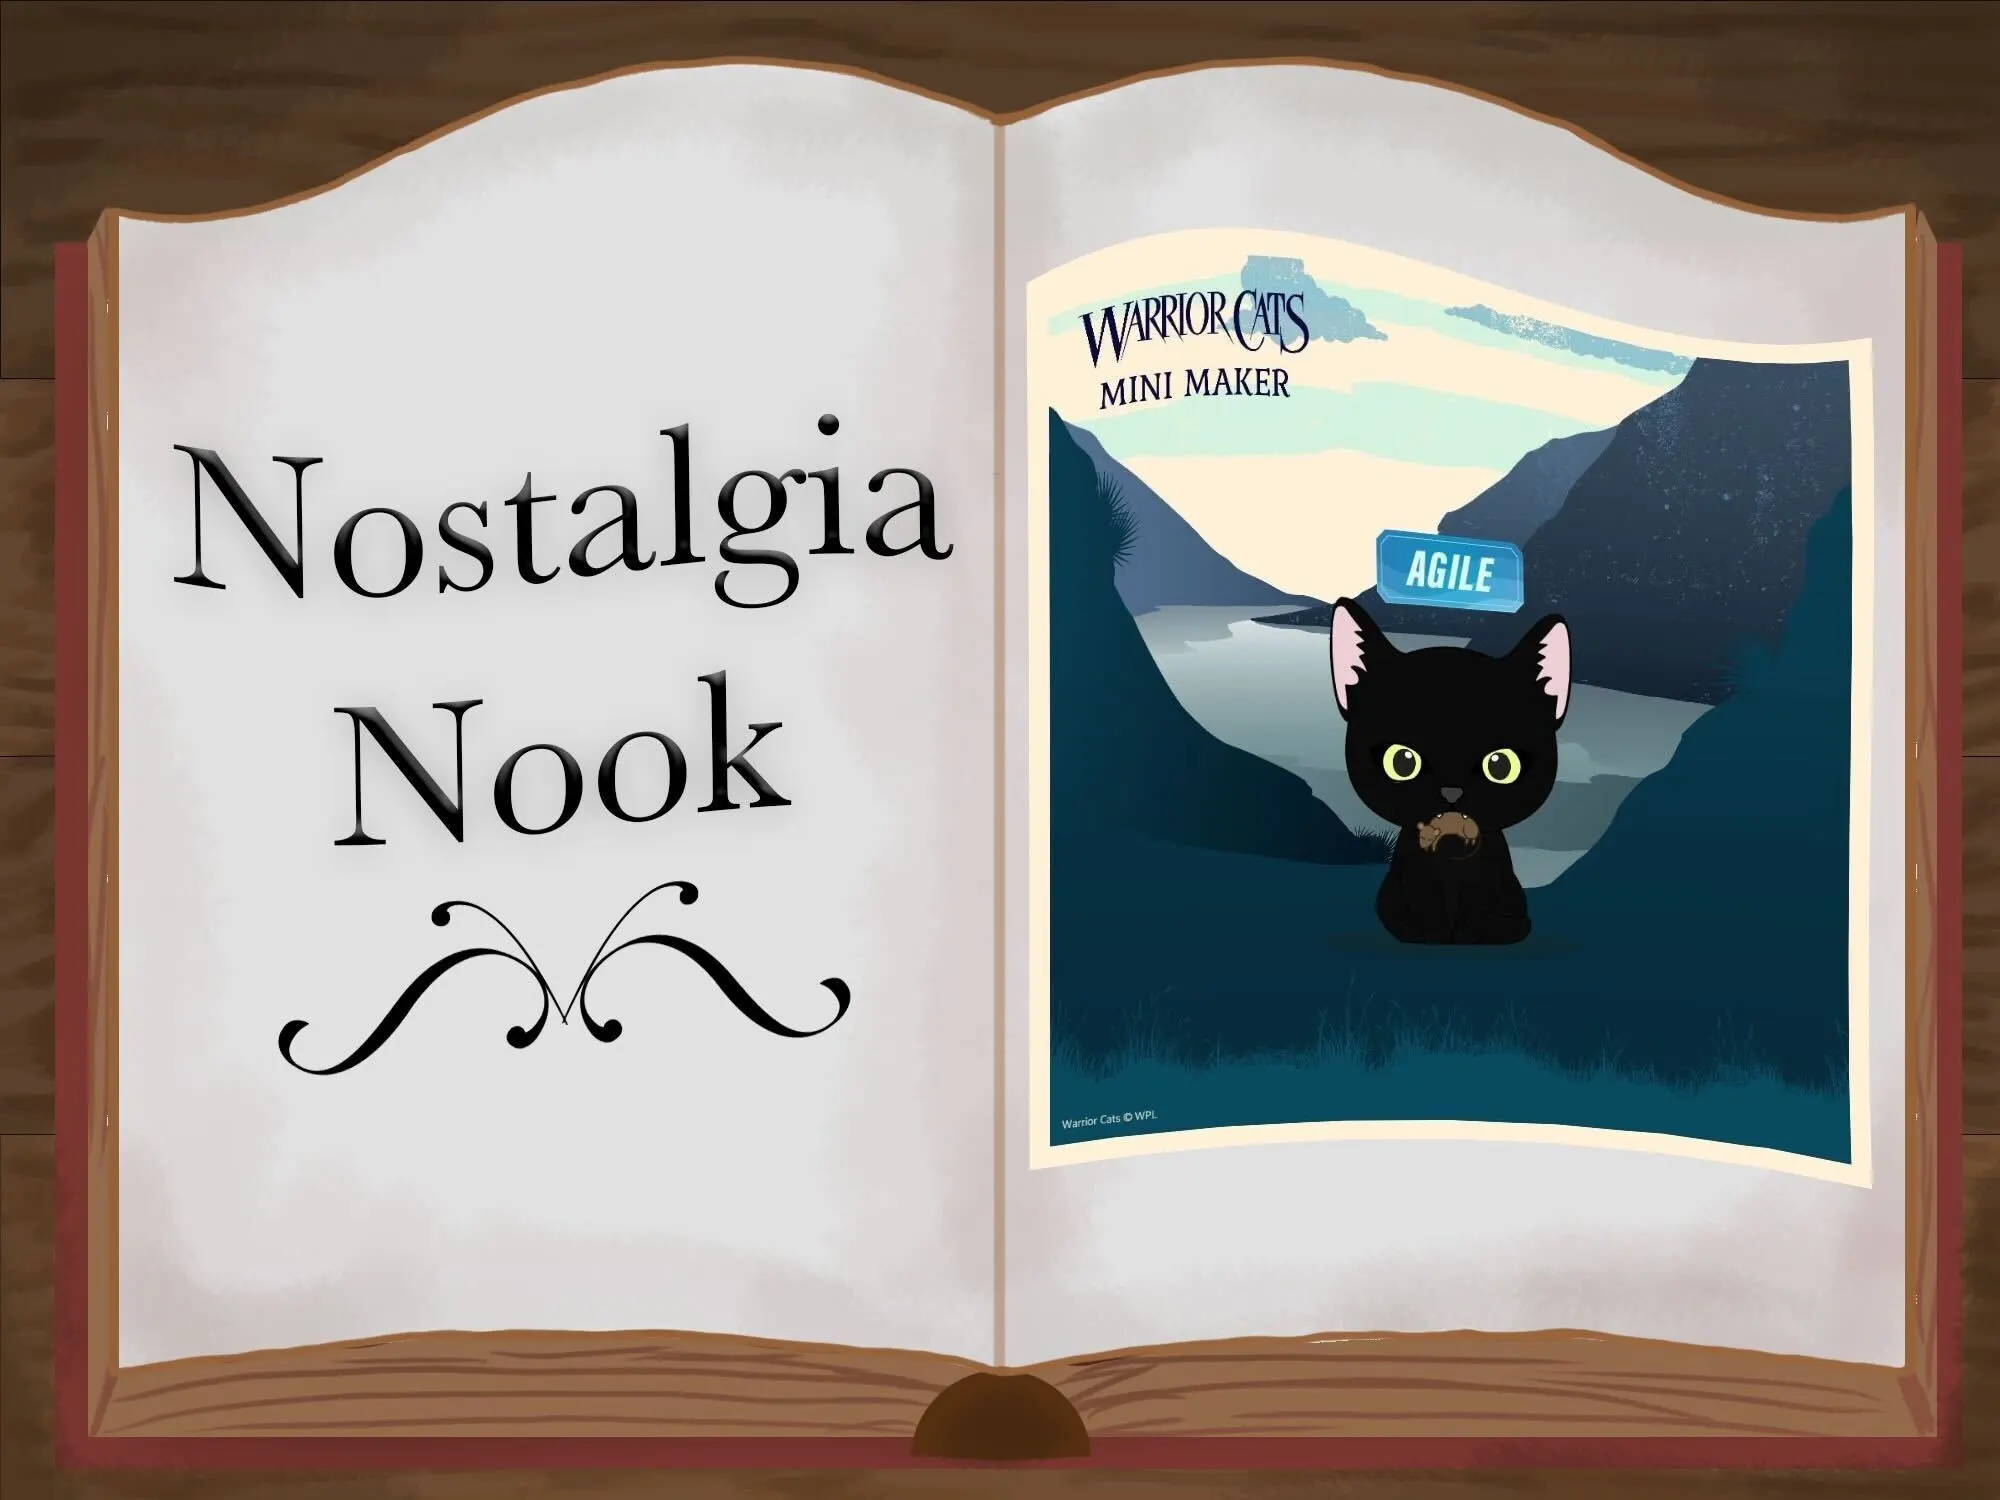 Nostalgia Nook: “Warrior Cats,” Playground Role-Play, and Roblox